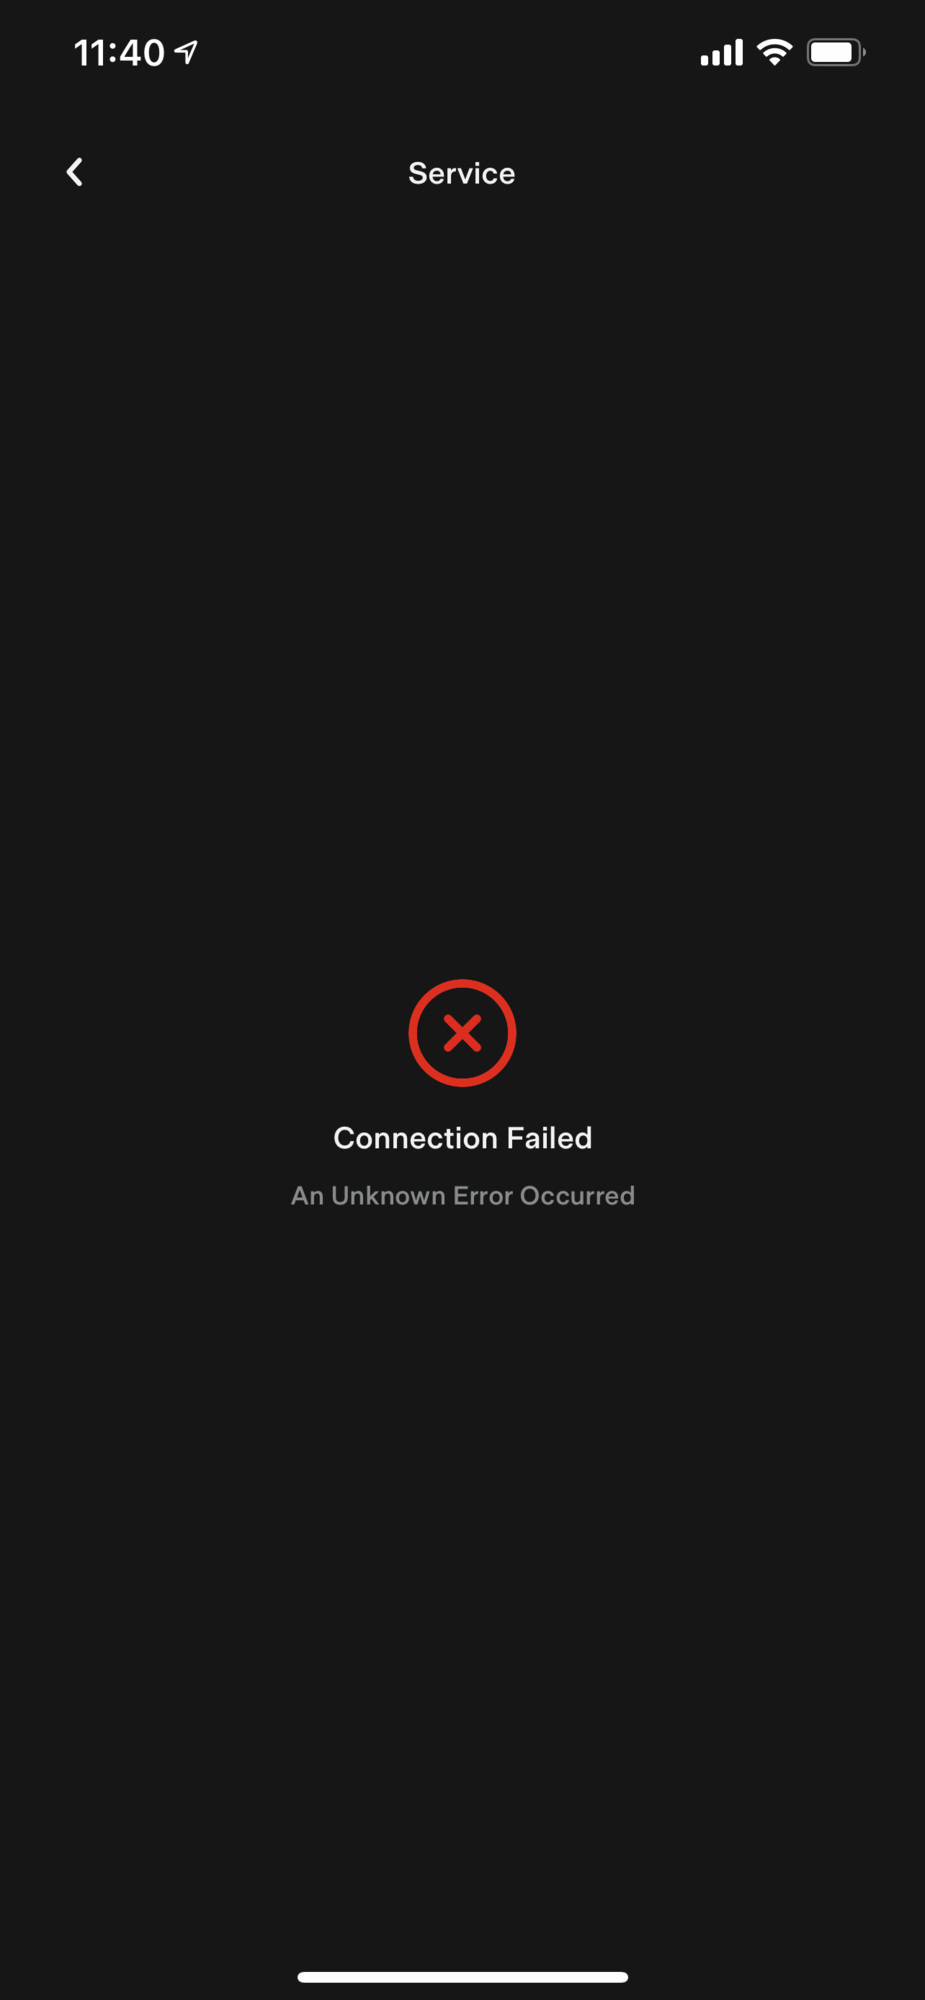 Connection Failed, an unknown error occurred | Tesla Motors Club